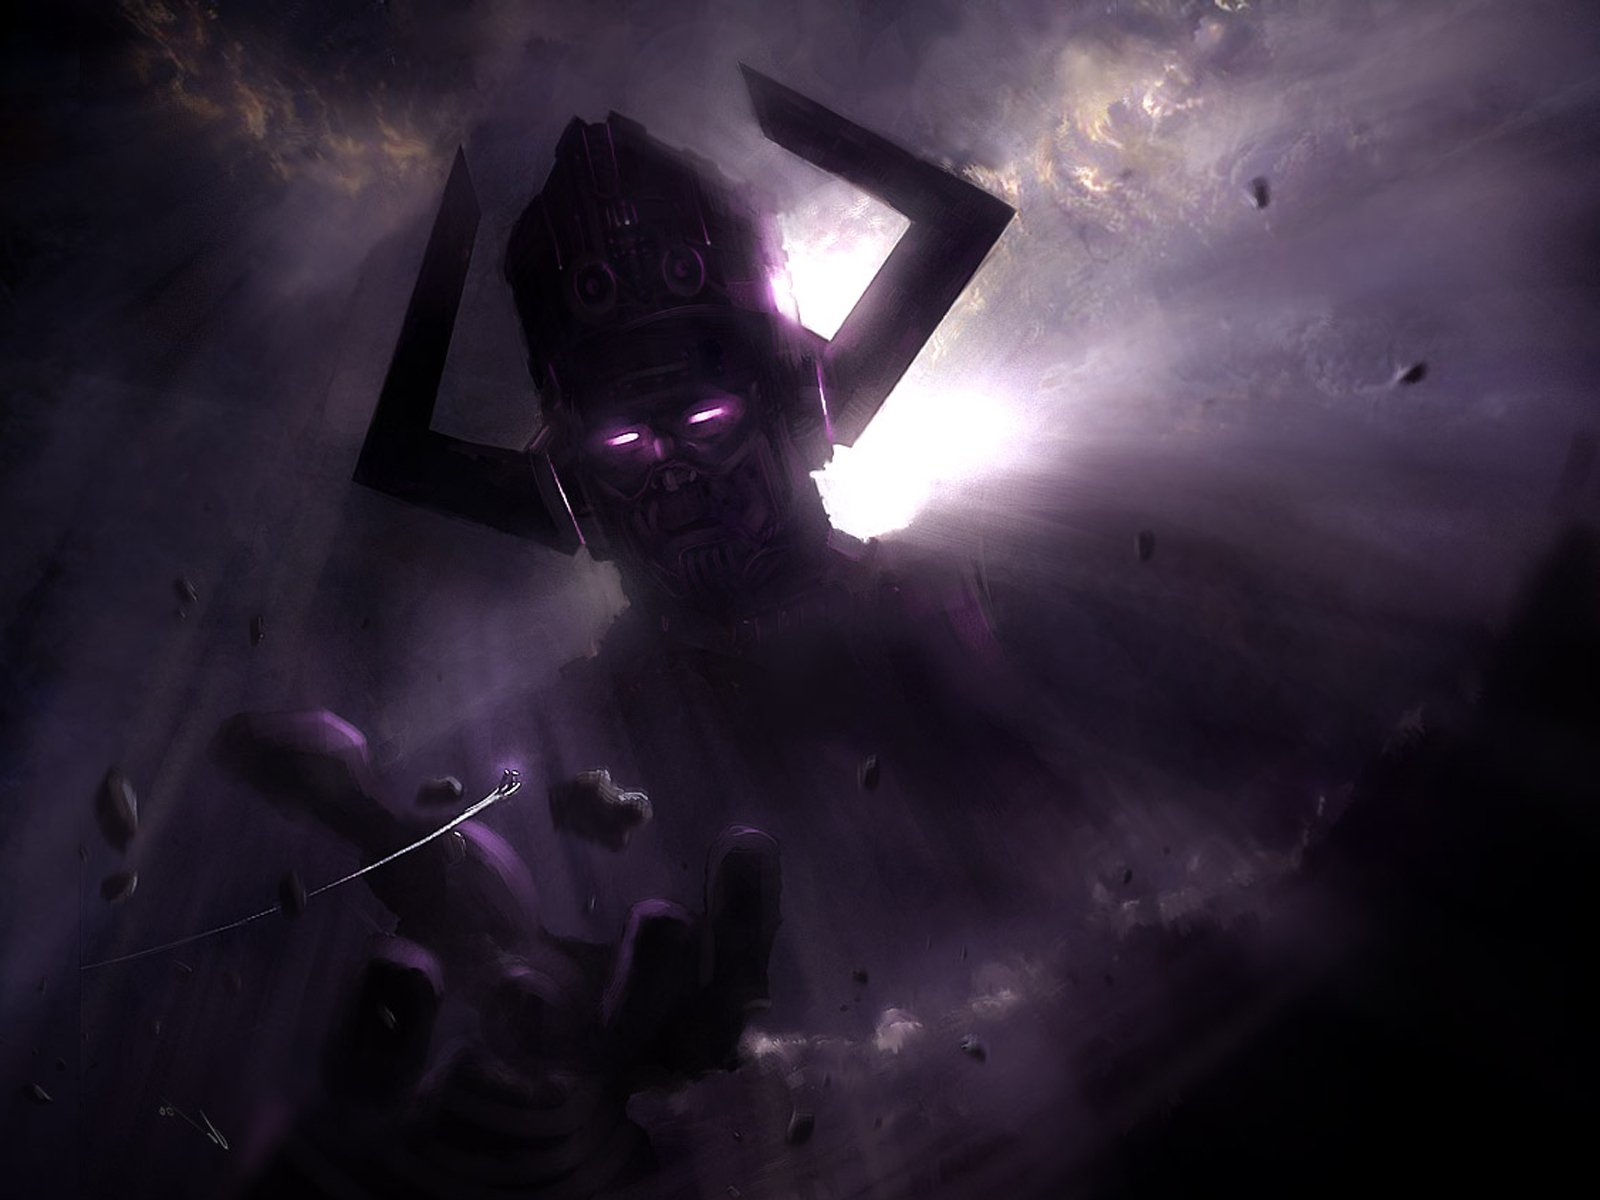 47 Galactus Hd Wallpapers Background Images Wallpaper Abyss Images, Photos, Reviews